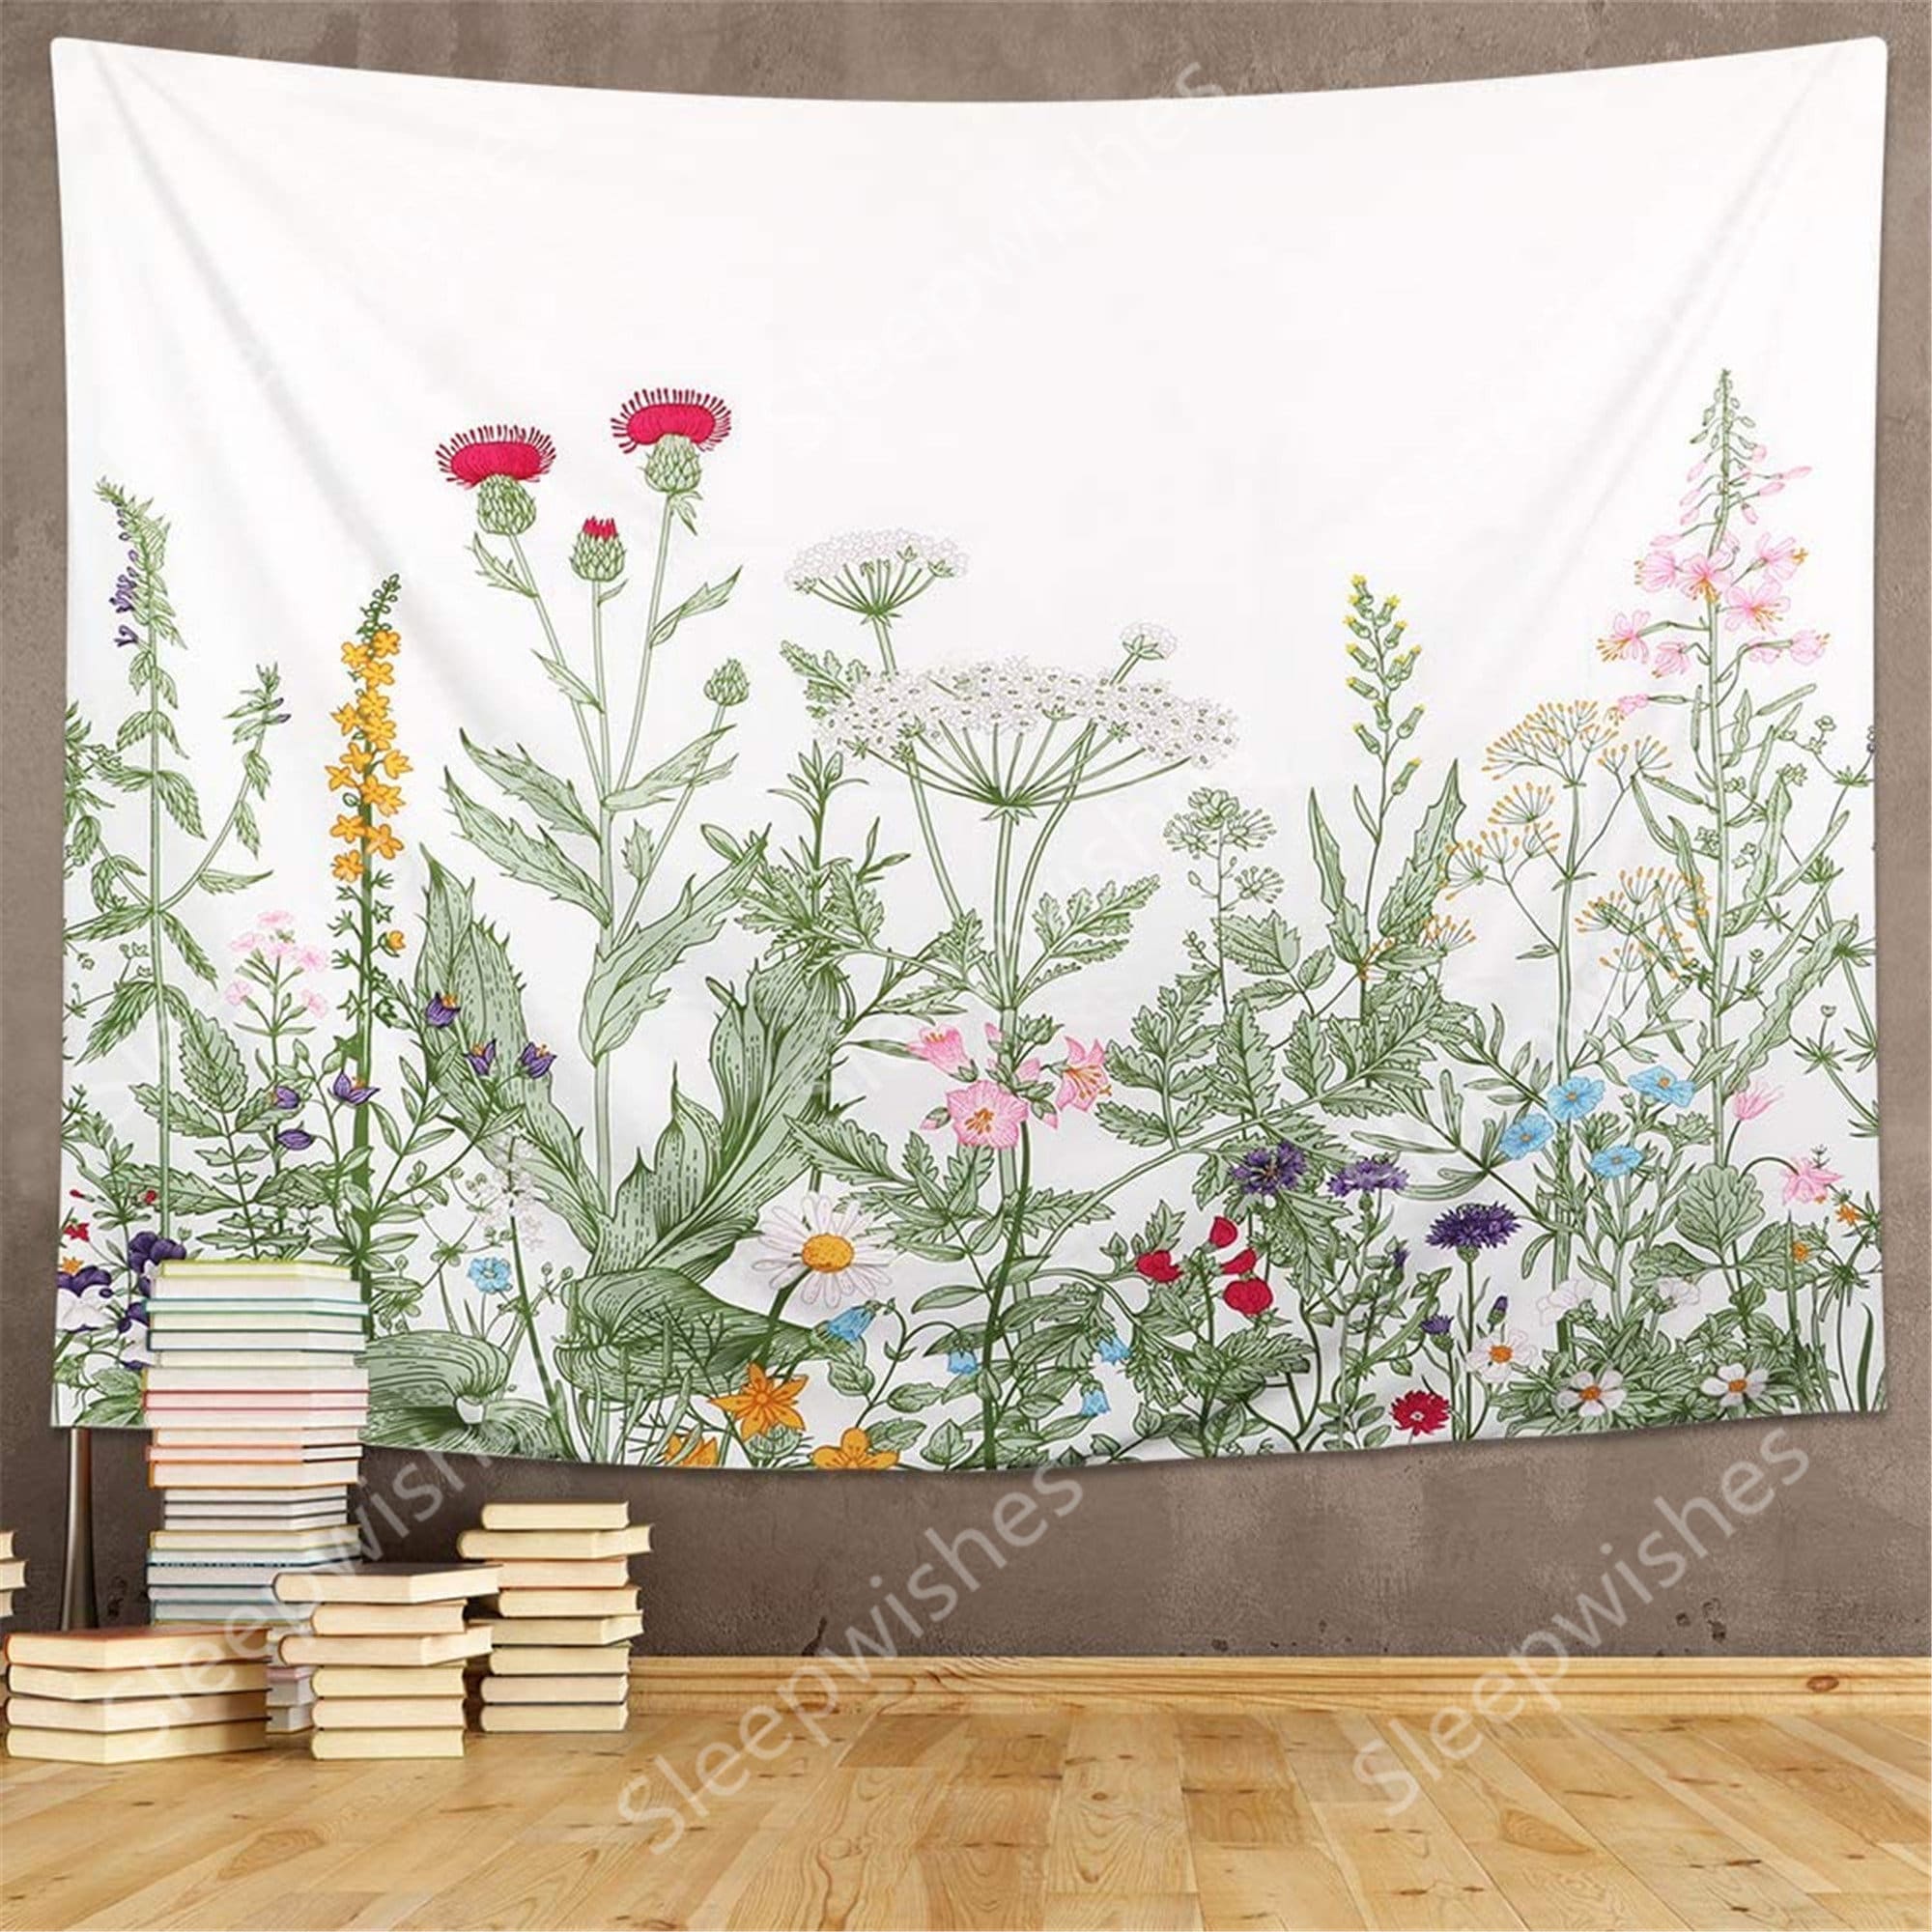 Colorful Floral Plants Tapestry Vintage Herbs Tapestry Wild Flowers Tapestry  Wall Hanging Nature Scenery Tapestry for Living Room Bedroom 